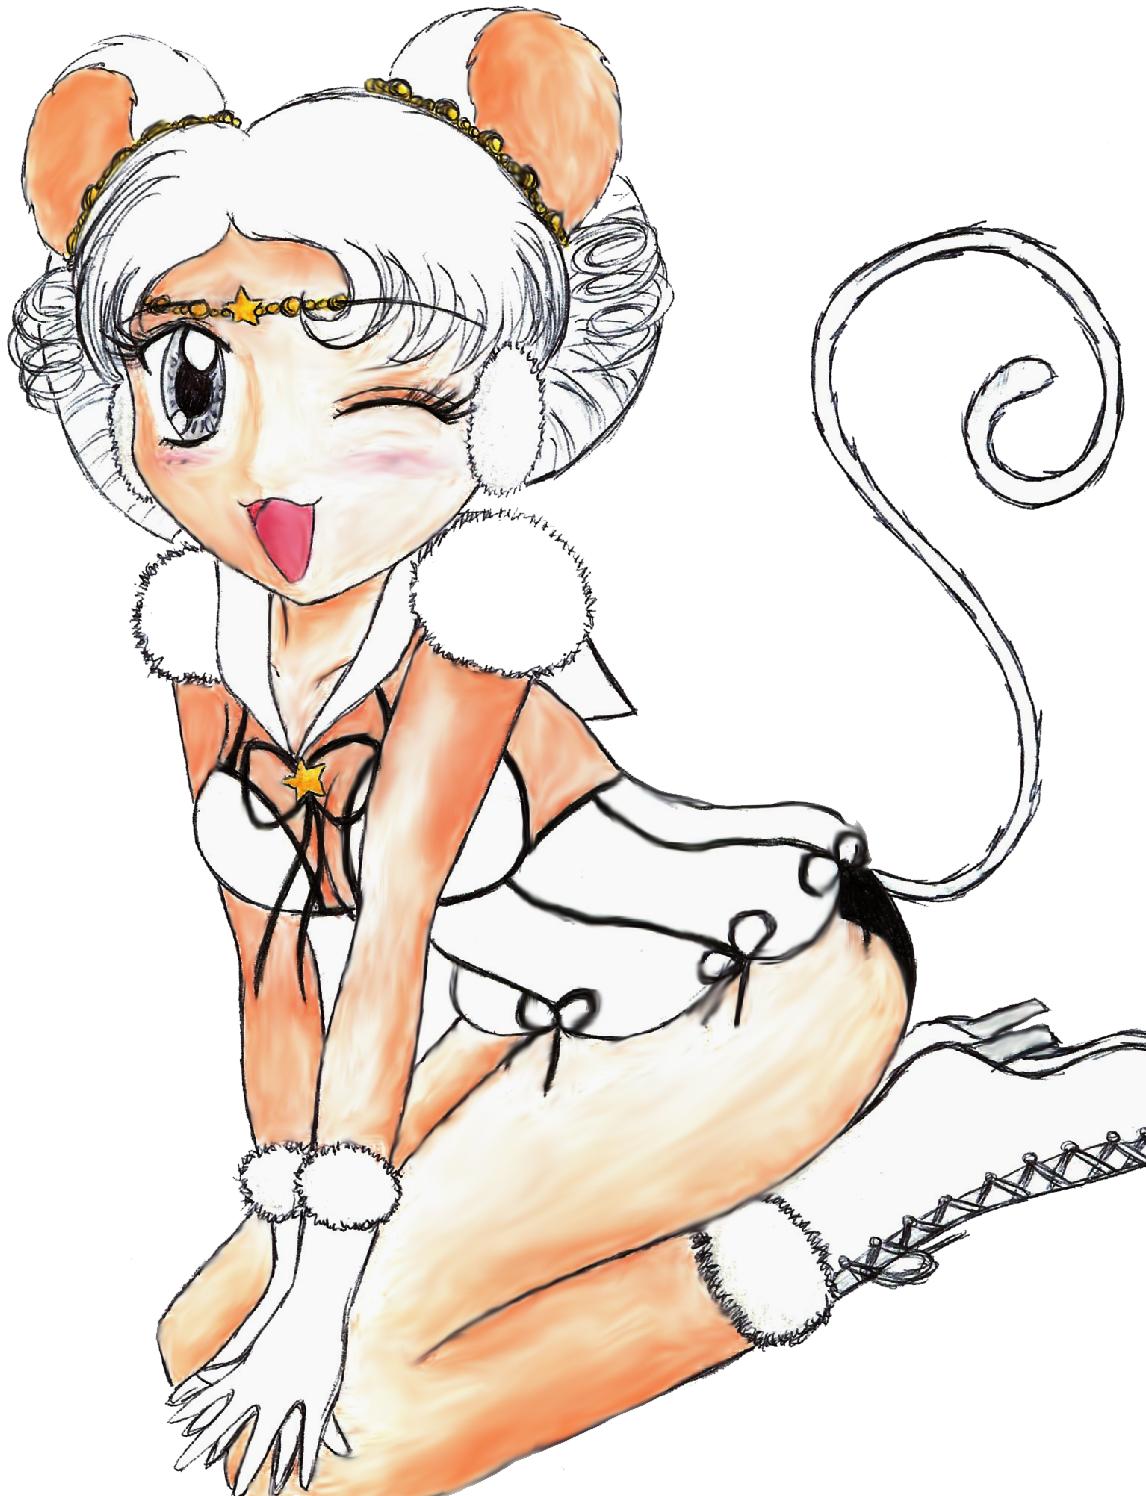 Sailor Iron Mouse by Sliv